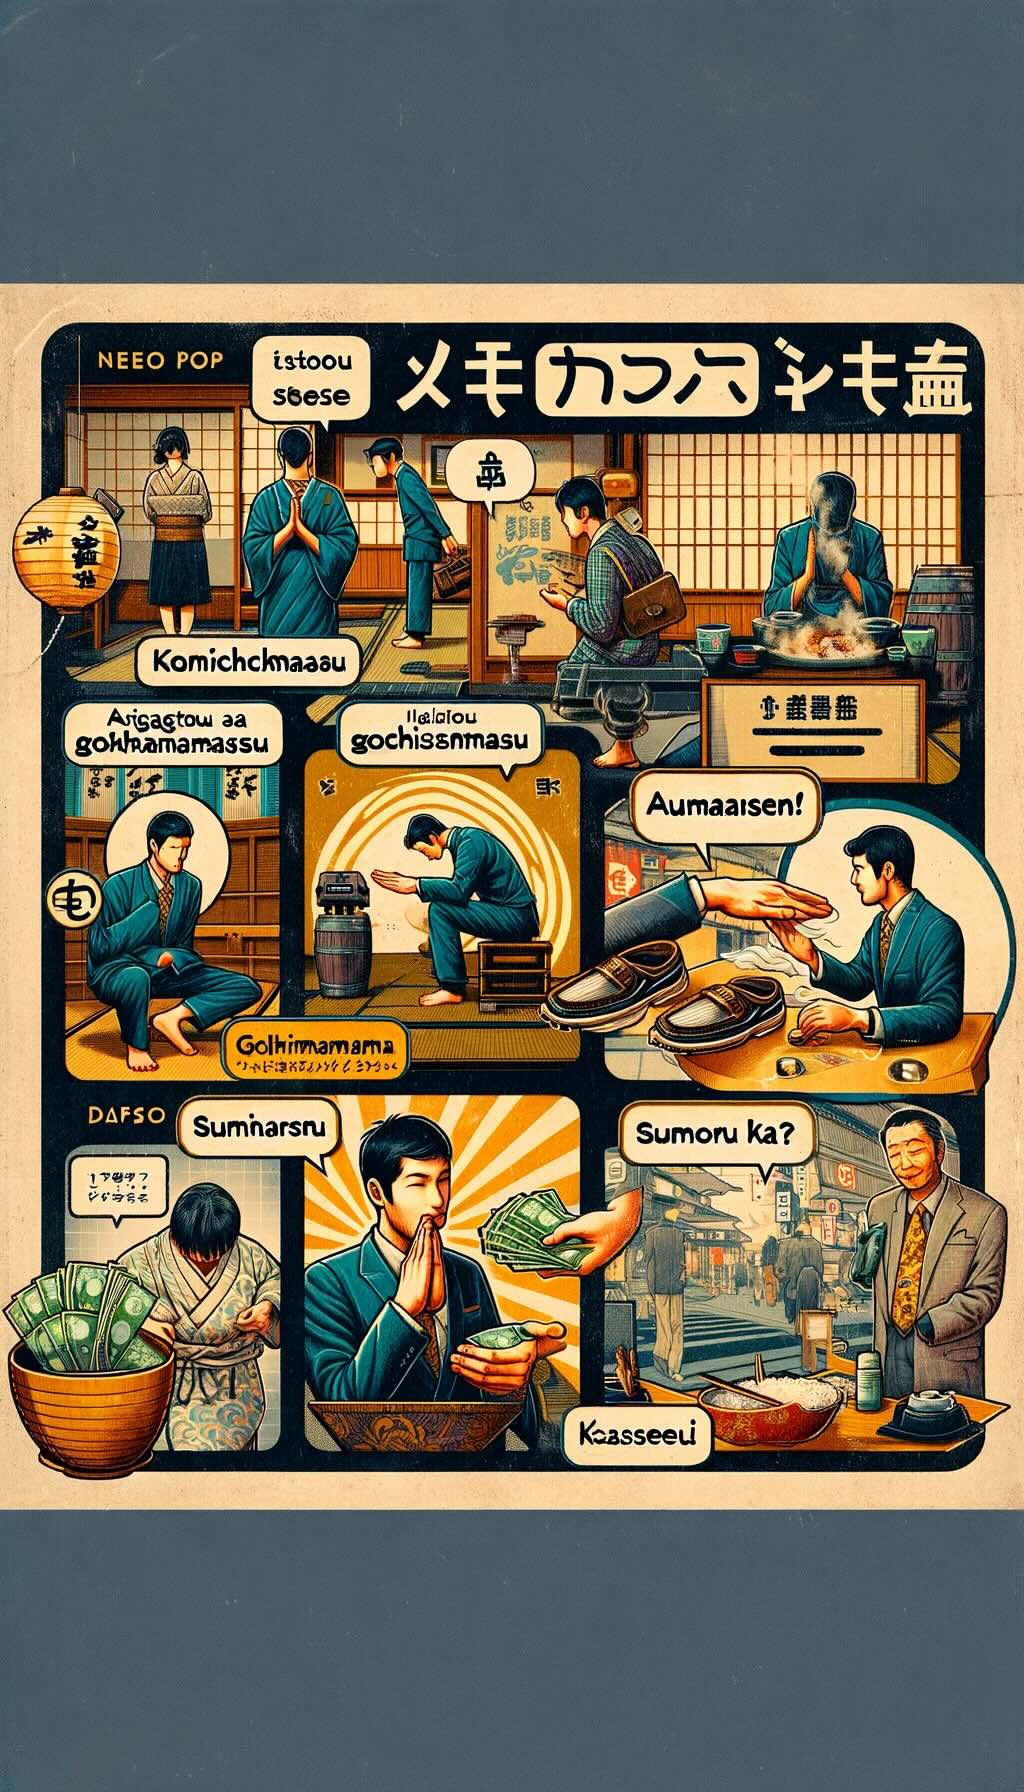 Cultural etiquette and useful Japanese phrases for travelers in Sapporo, depicts a series of scenarios that reflect the importance of politeness, respect, and understanding in Japanese culture. You can see a traveler bowing in greeting, removing shoes before entering a traditional establishment, and dining with expressions of gratitude such as “itadakimasu” and “gochisousama deshita.” It also shows the respectful practice of experiencing an onsen, adhering to the rules, and shopping etiquette with money placed on the provided tray. Visual representations of the phrases “Konnichiwa,” “Arigatou gozaimasu,” “Sumimasen,” “Eigo o hanasemasu ka?”, “_______ wa doko desu ka?”, and “Ikura desu ka?” are included, enriching the visitor's experience by highlighting key aspects of navigating the cultural landscape of Sapporo. It conveys the enriching interactions and experiences that await travelers, emphasizing the communal joy and mutual respect that define the essence of travel in Japan.